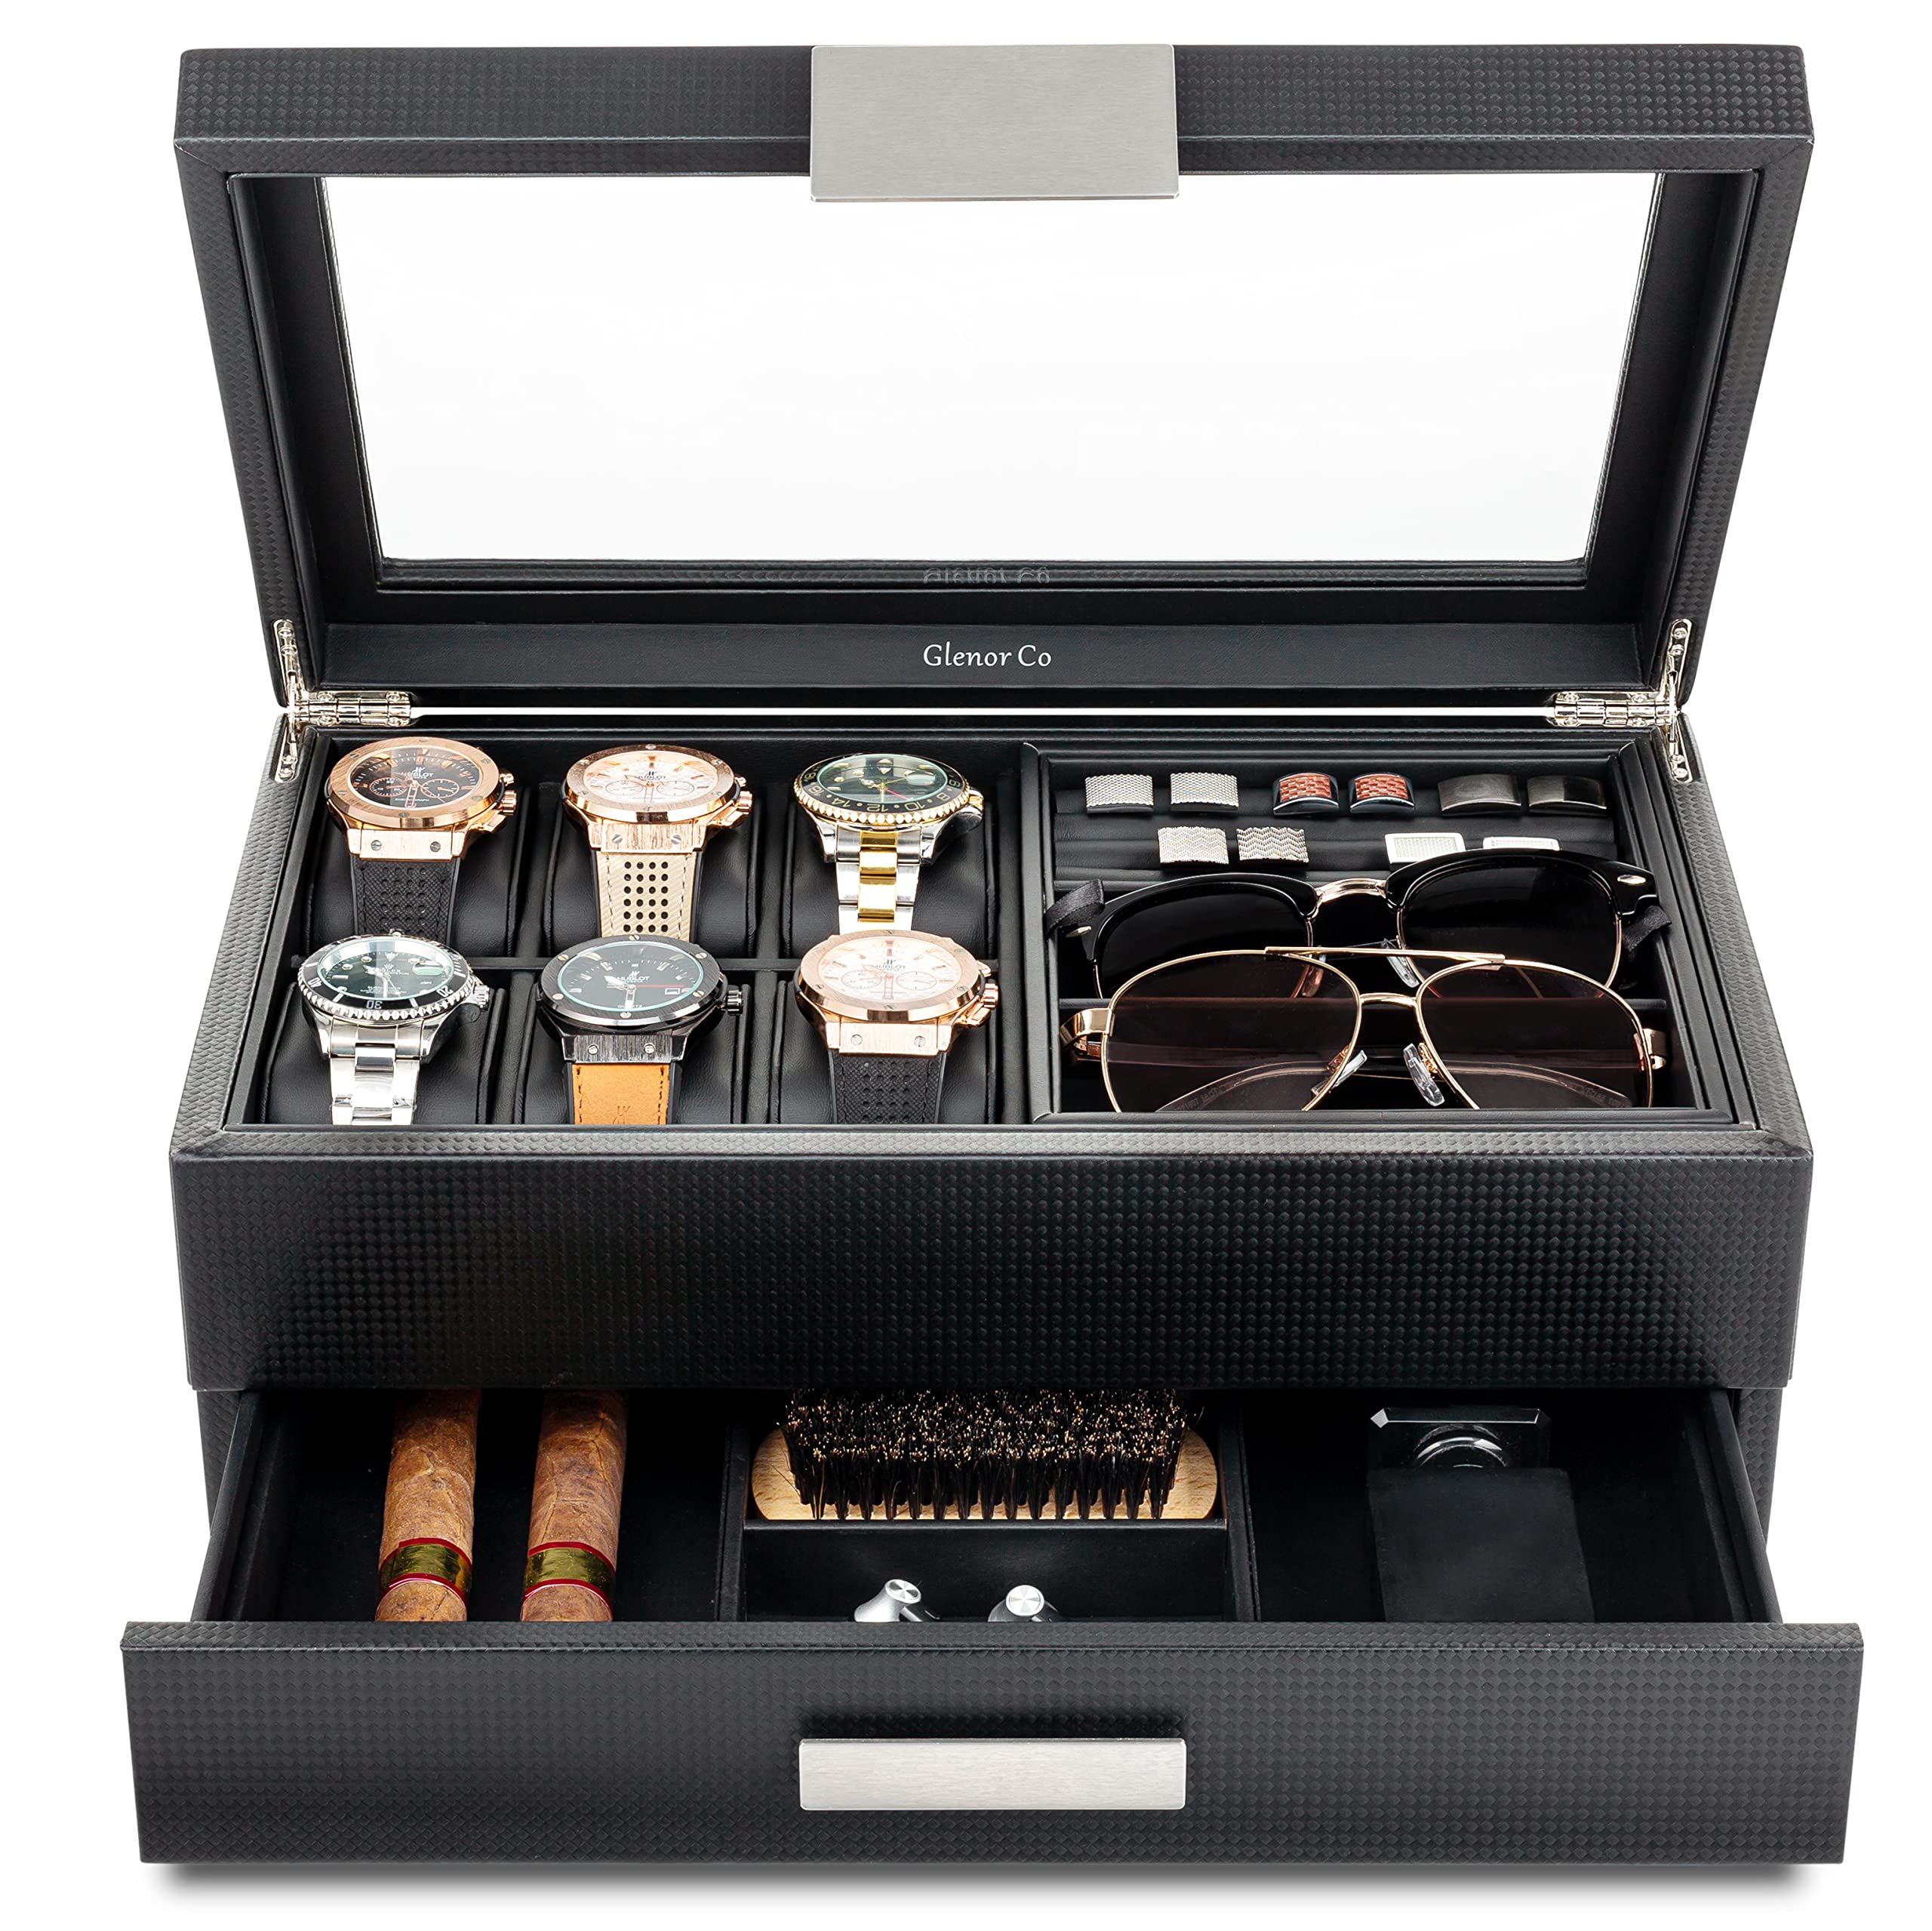 Glenor Co Valet Jewelry Box for Men - Holds 6 Watches, 12 cufflinks, 2 Sunglasses, Drawer & Tray Storage - Mens Watch Case - CarbonFiber Organizer w Metal Accents, PU Leather & Large Glass Lid - Black